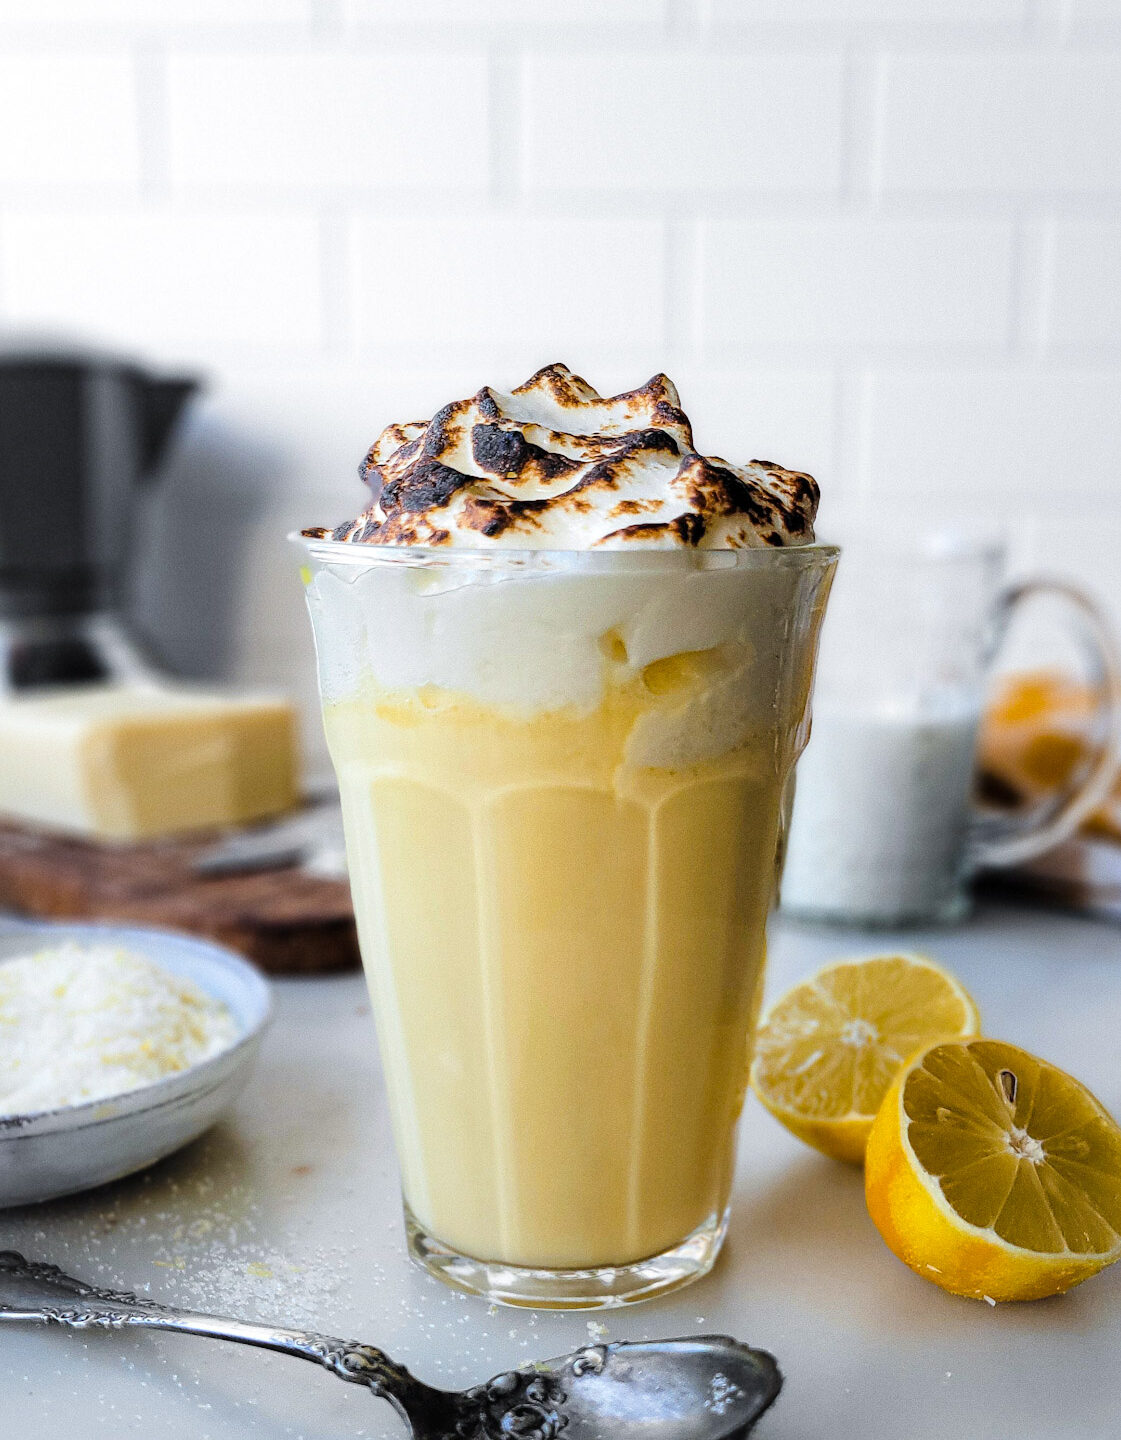 A glass filled with Lemon Meringue Hot Chocolate surrounded by sliced lemons and a bowl of lemon sugar.